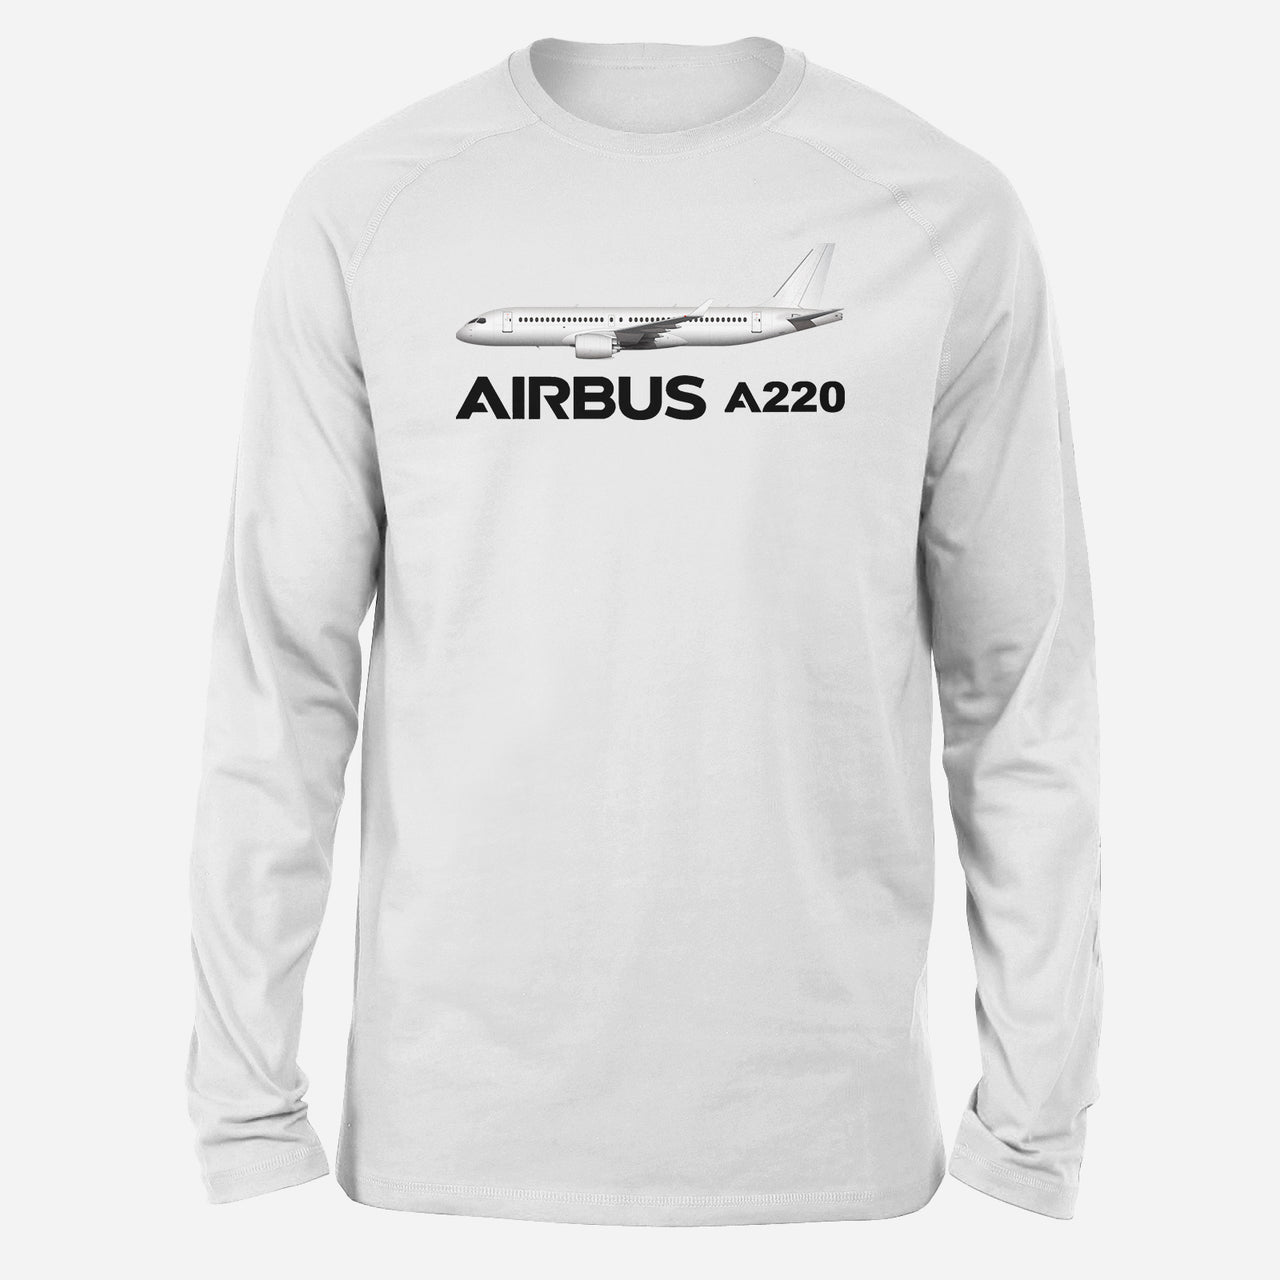 The Airbus A220 Designed Long-Sleeve T-Shirts